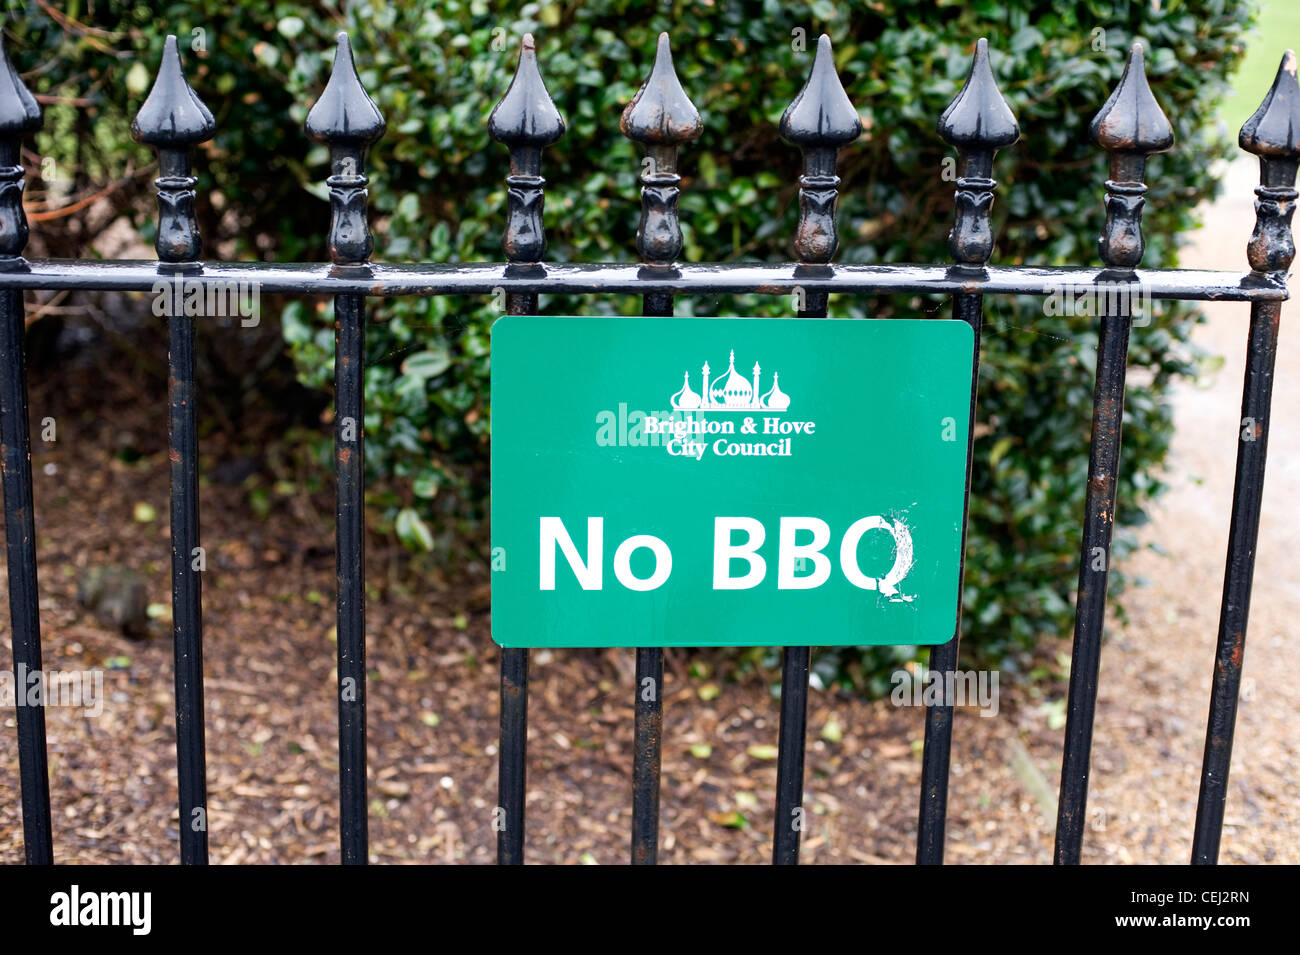 No BBQ sign, Brunswick Square, Hove, East Sussex, UK Stock Photo